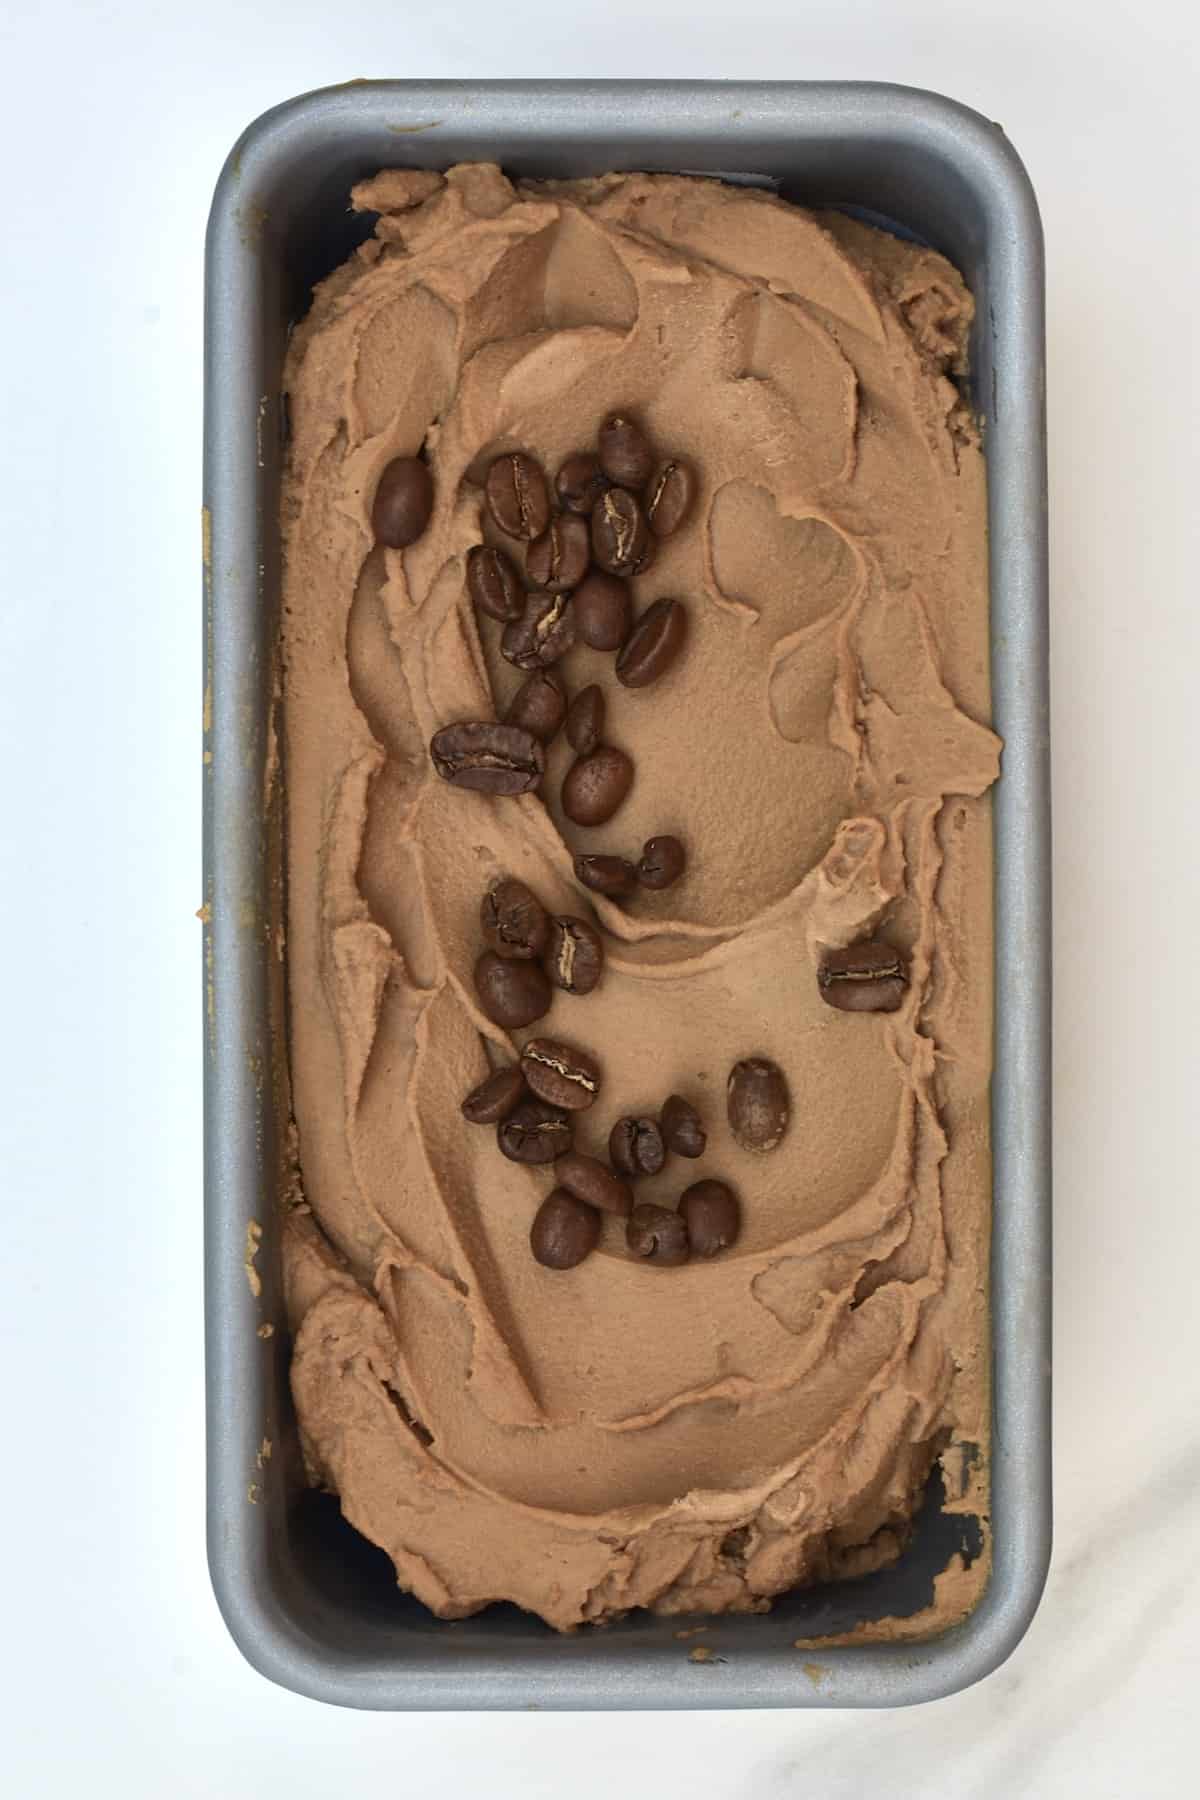 Coffee ice cream topped with coffee beans